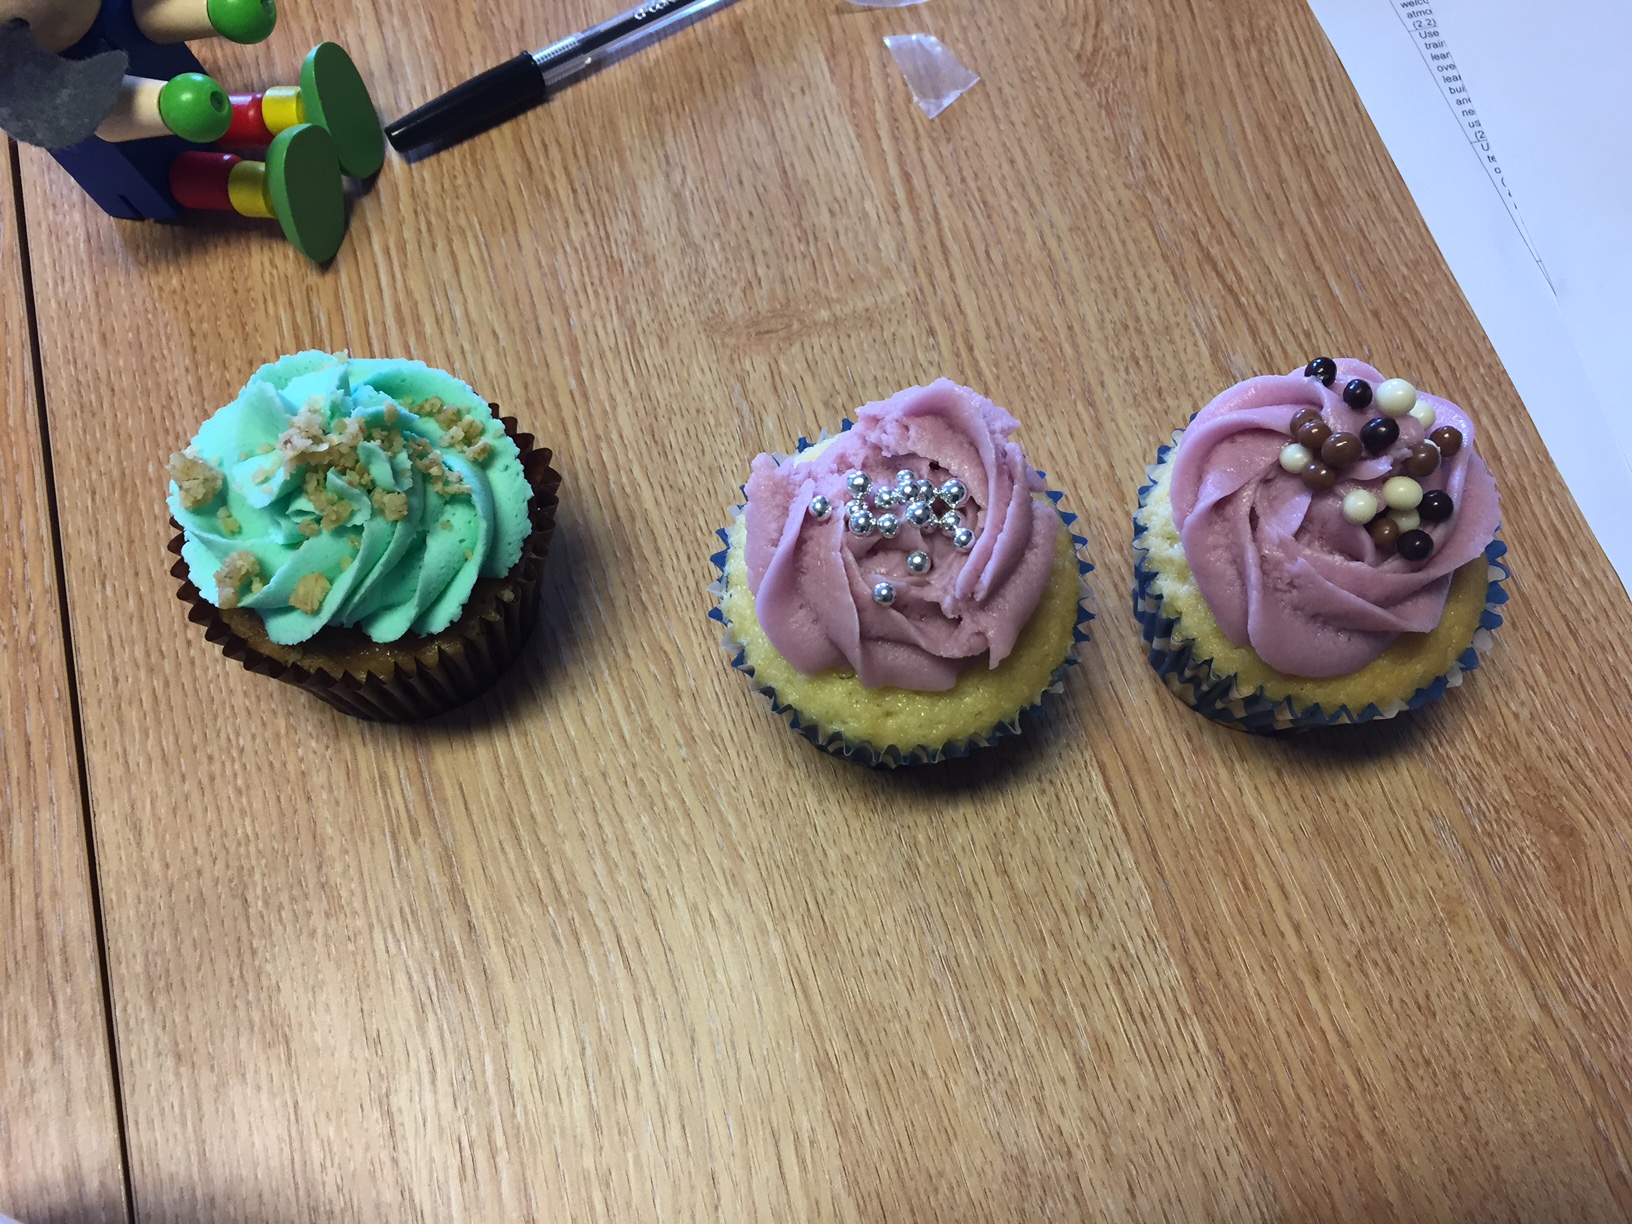 Cup cakes at cHRysos HR